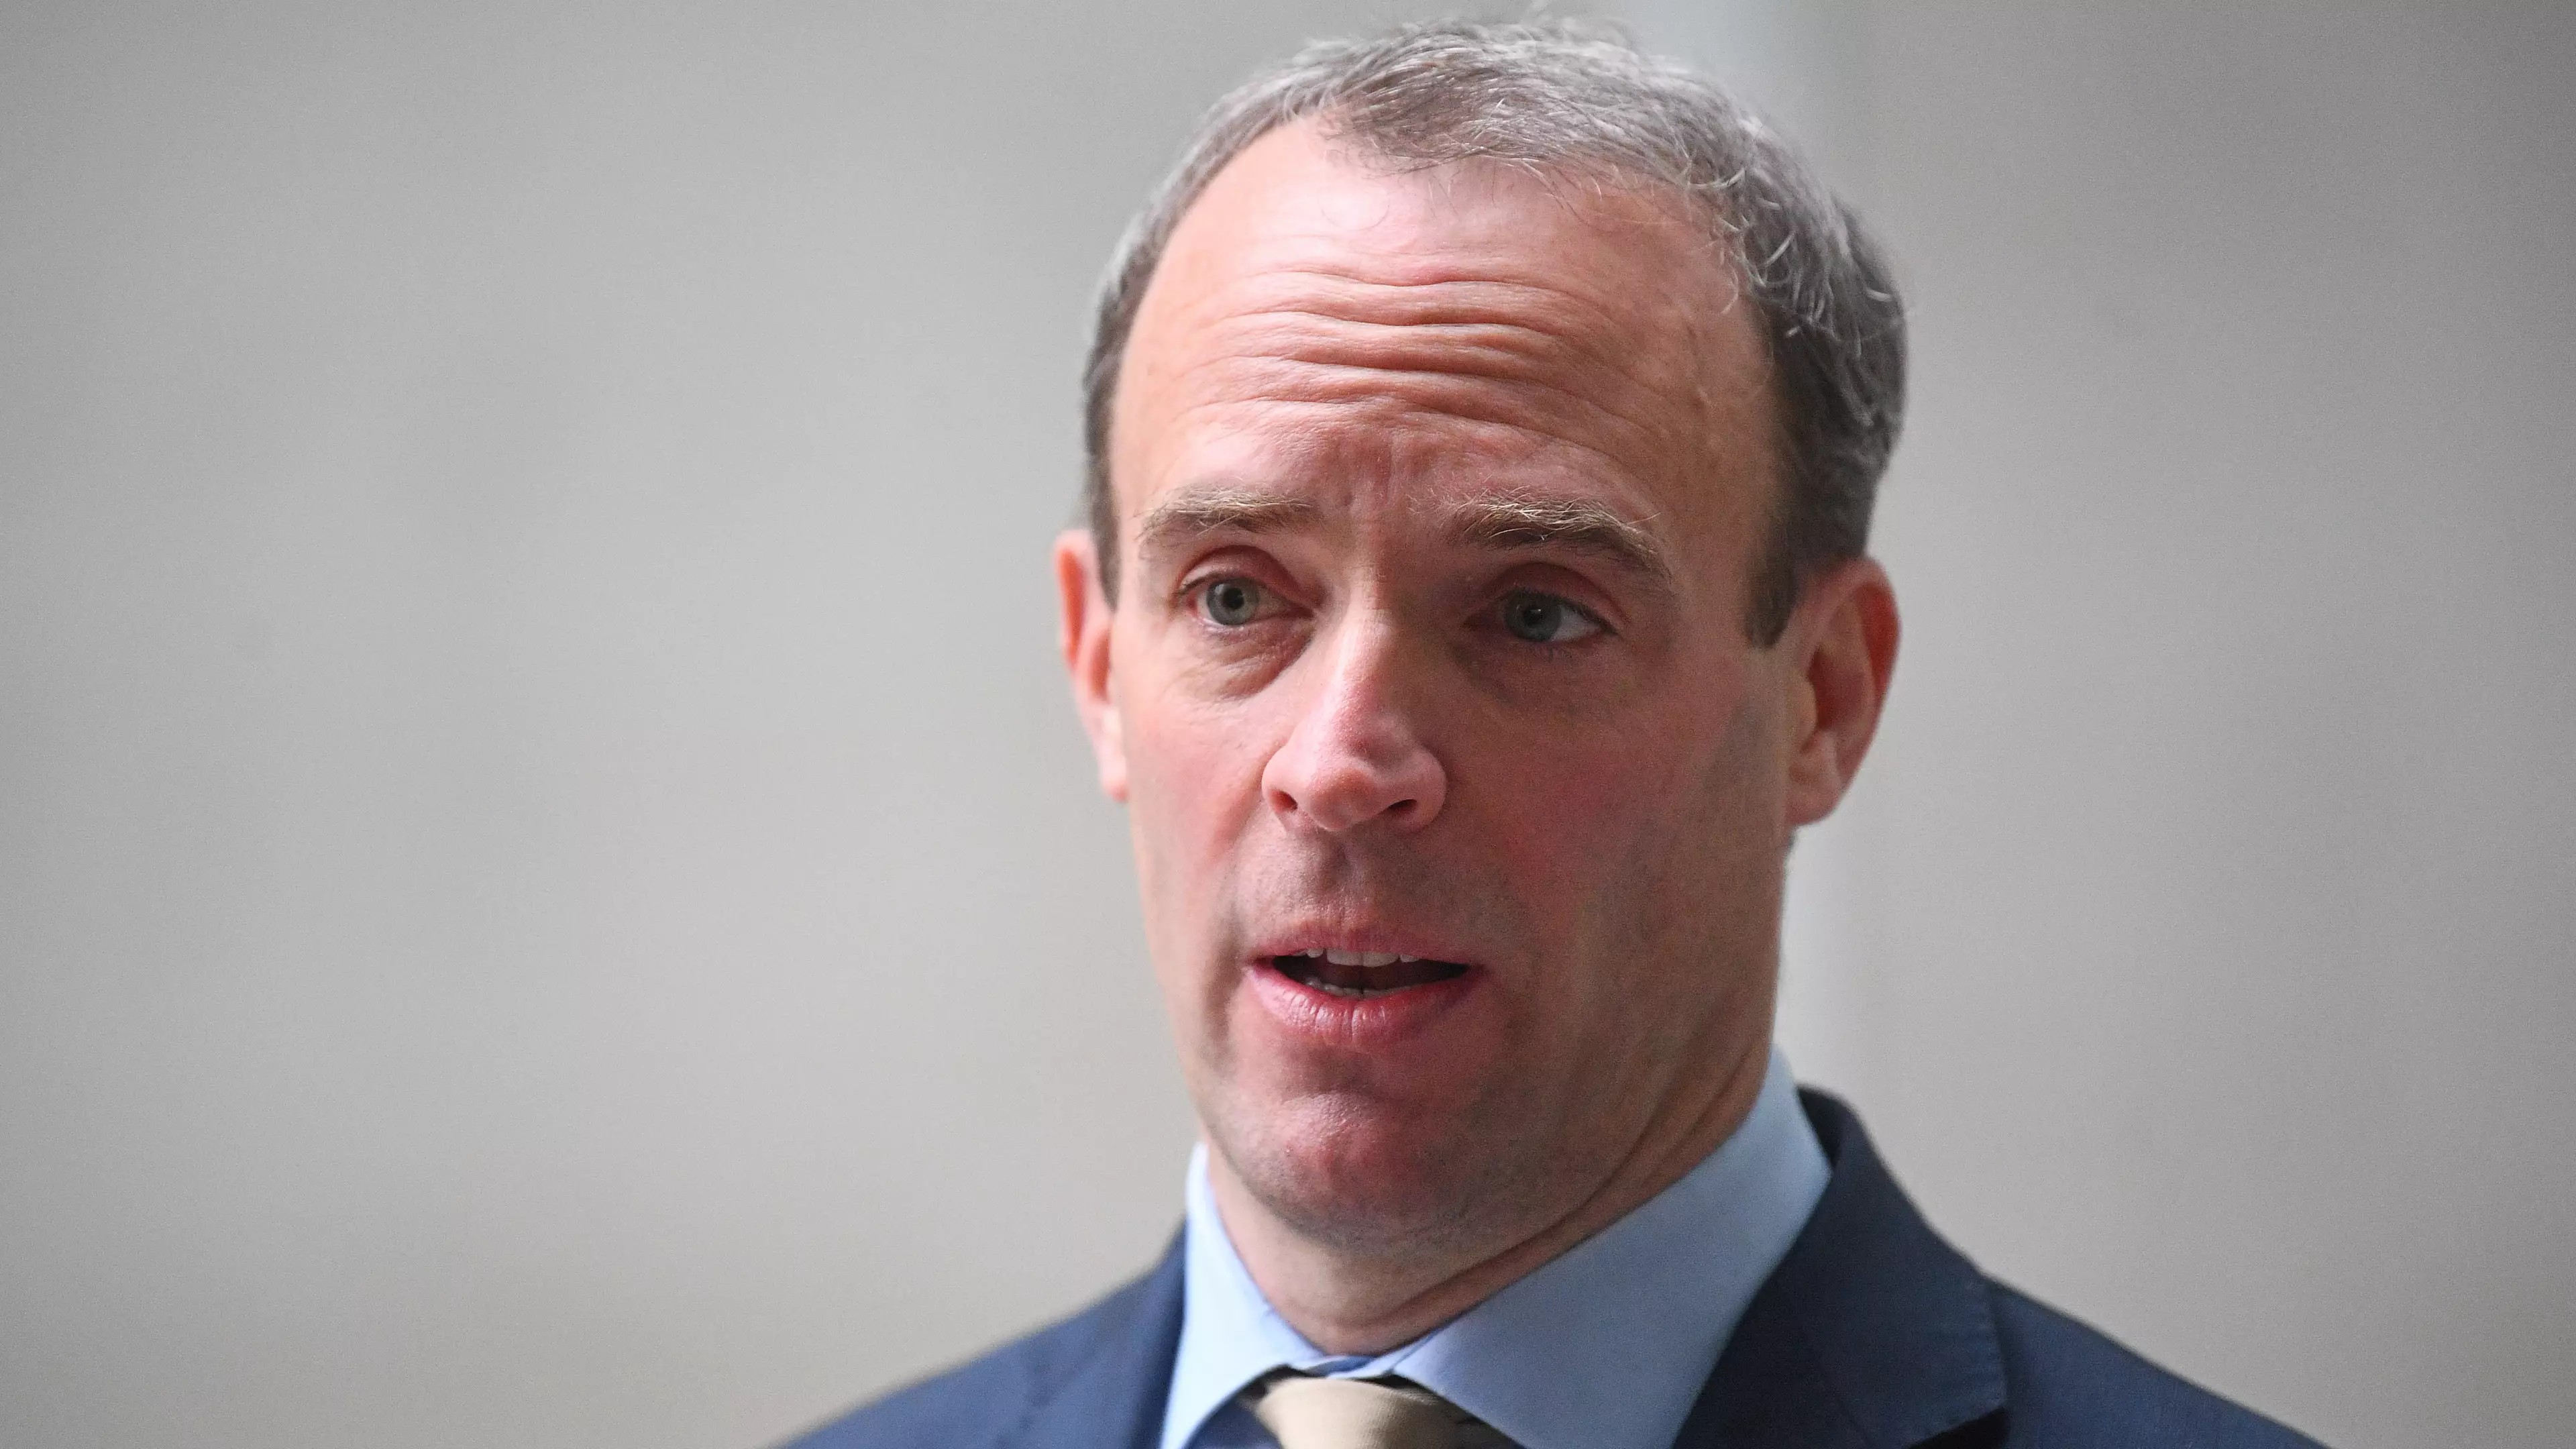 Dominic Raab Says 'Vaccine Passports' To Allow People Into Pubs And Supermarkets 'Not Ruled Out'